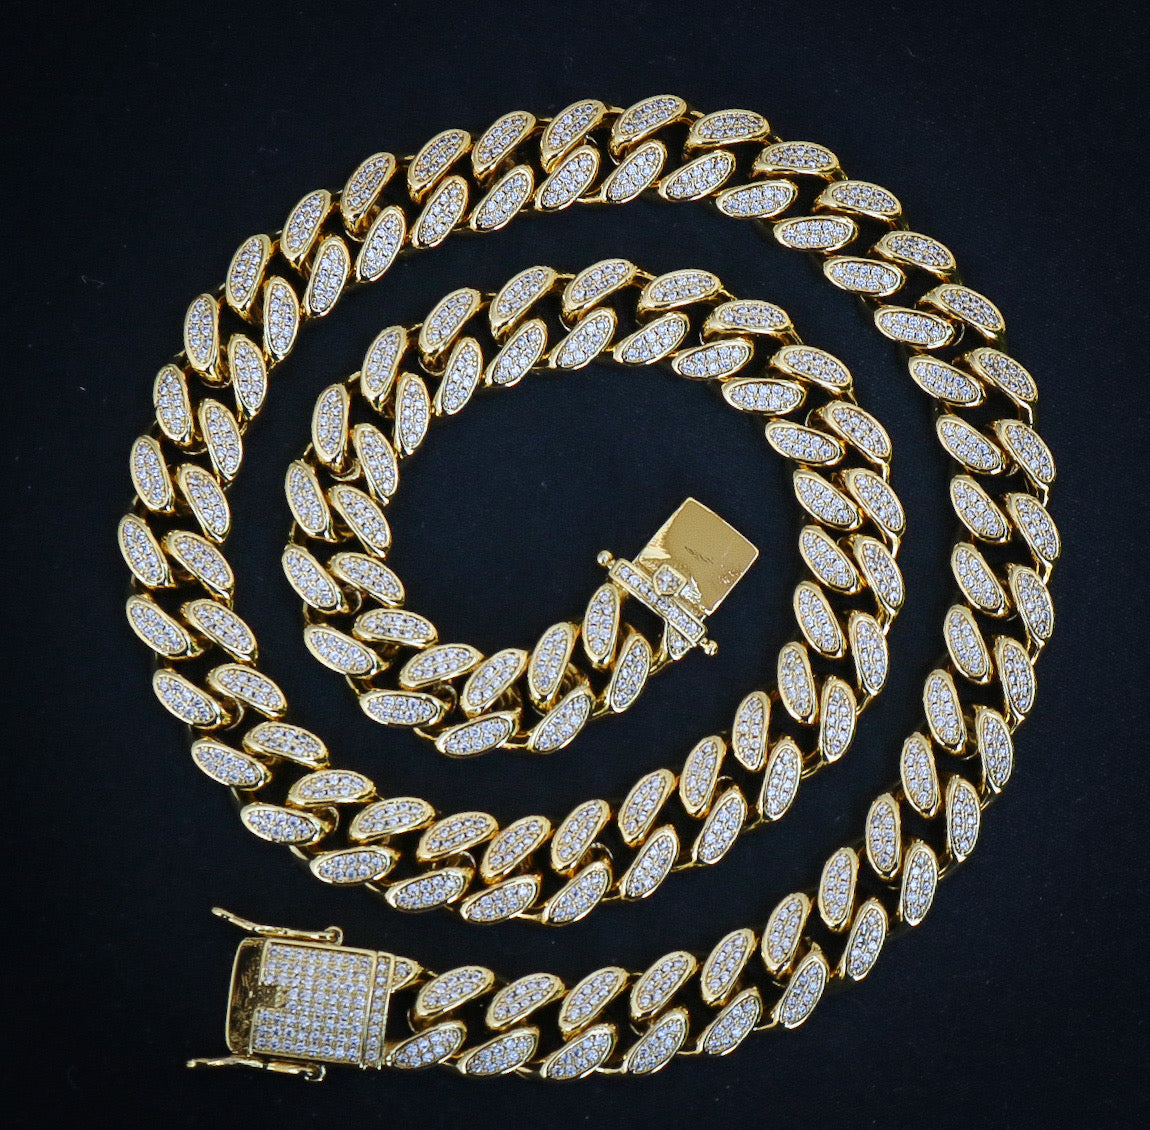 12mm Iced Out Box Chain in Yellow Gold 24inch